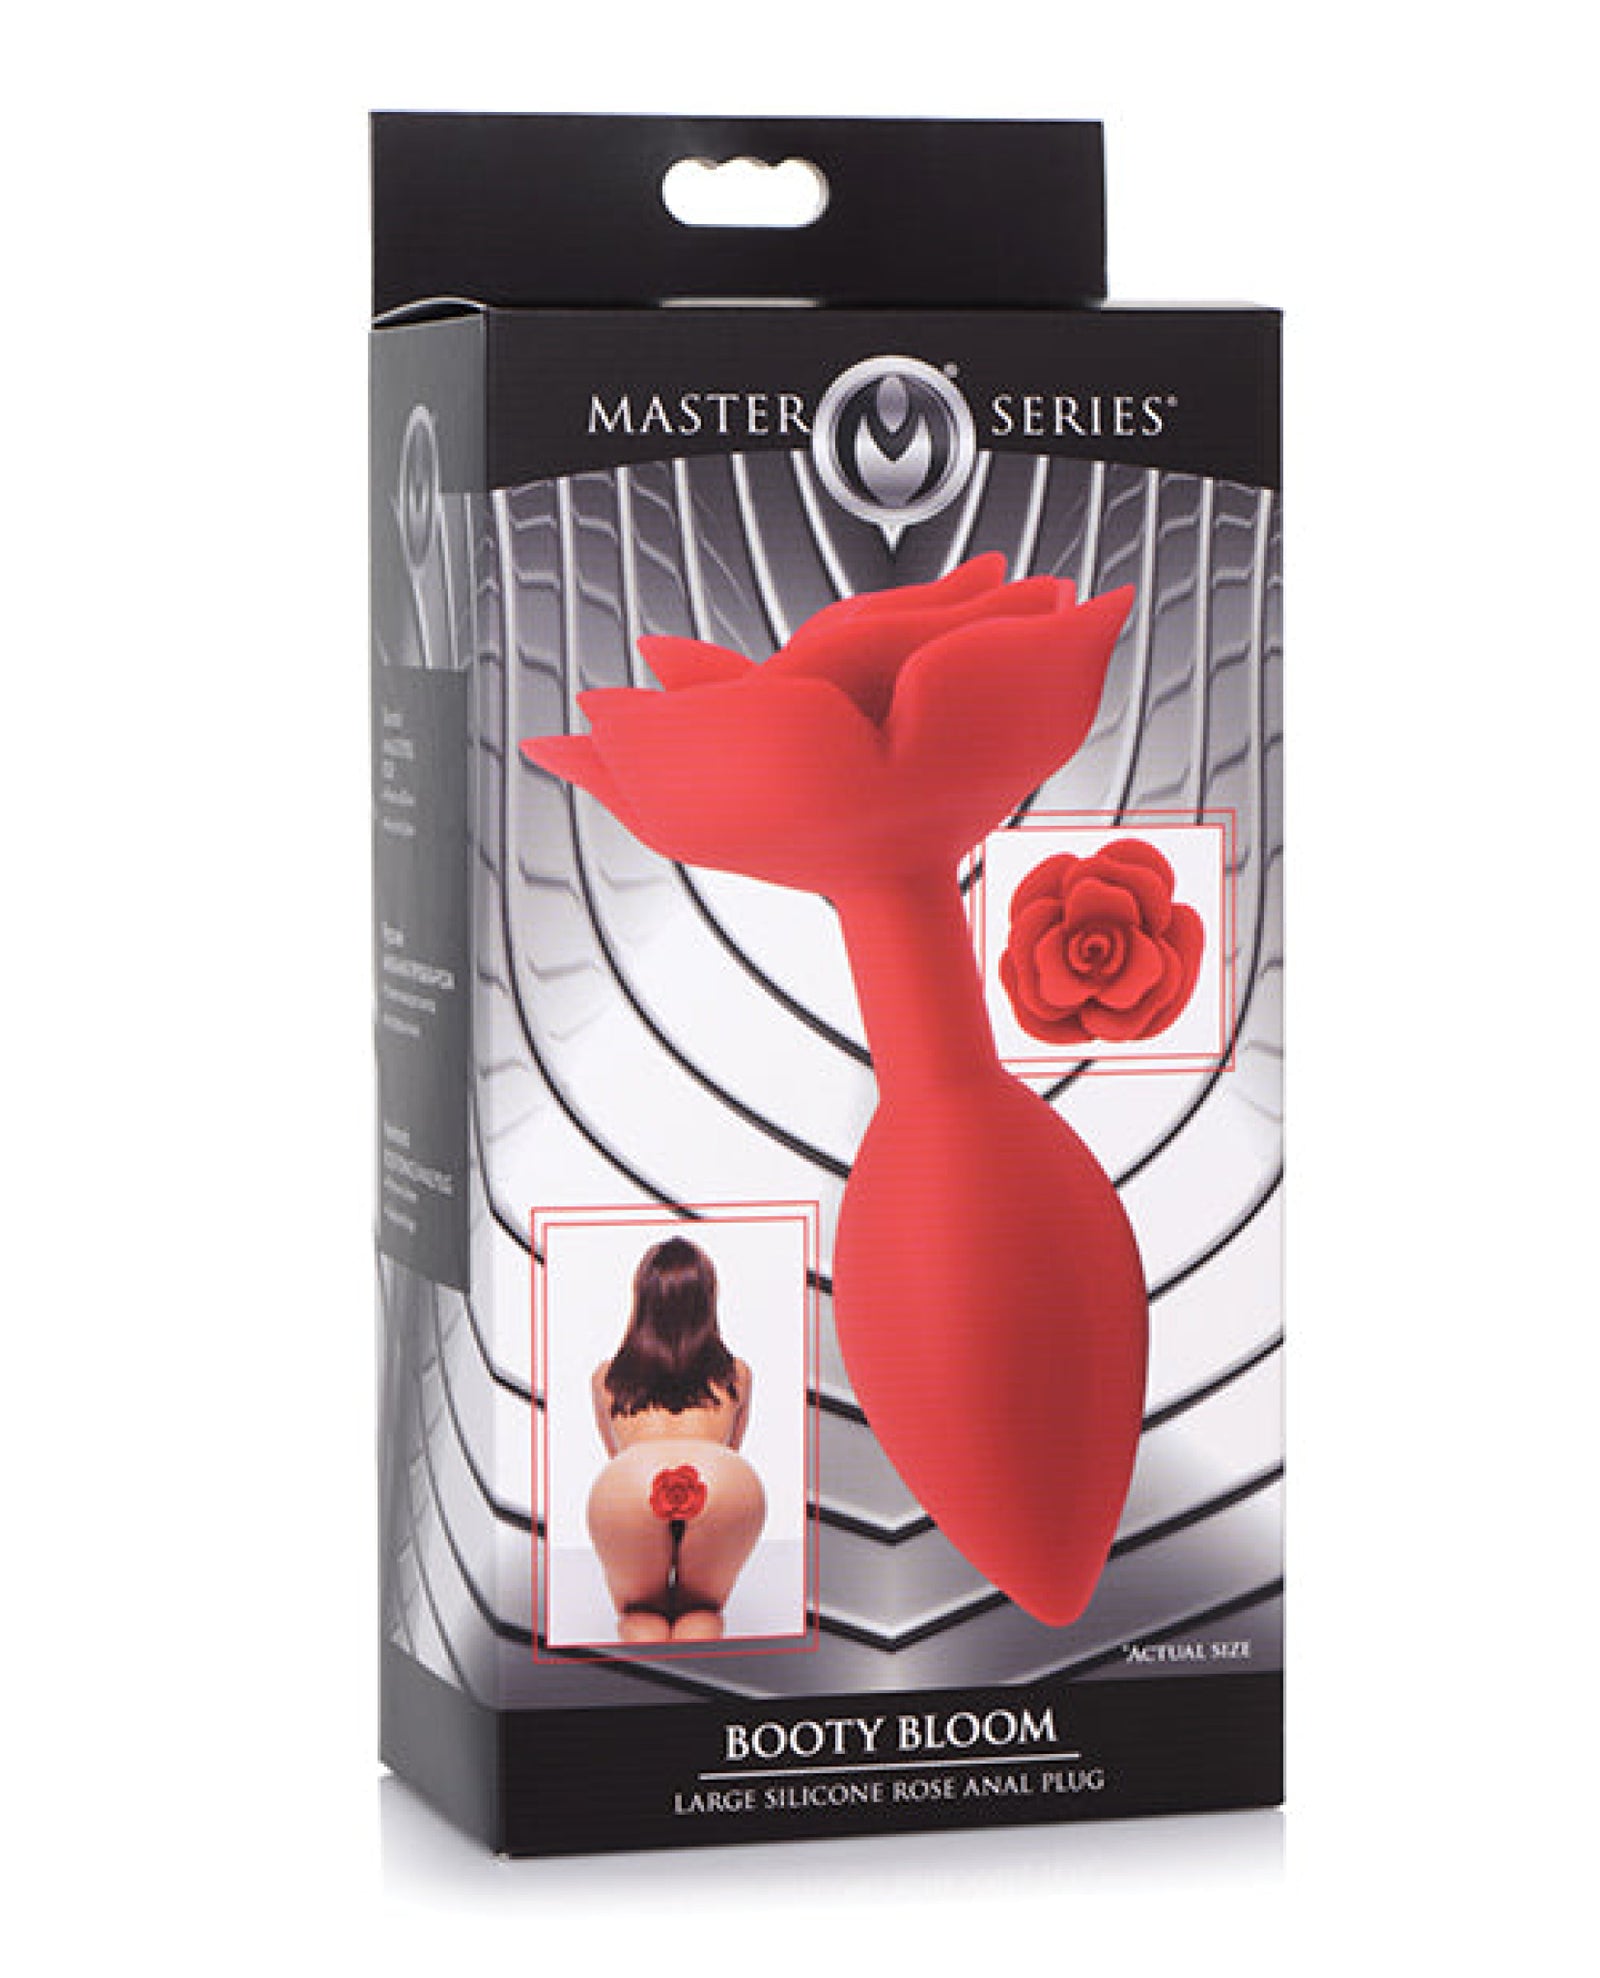 Booty Bloom Silicone Rose Anal Plug Booty Bloom